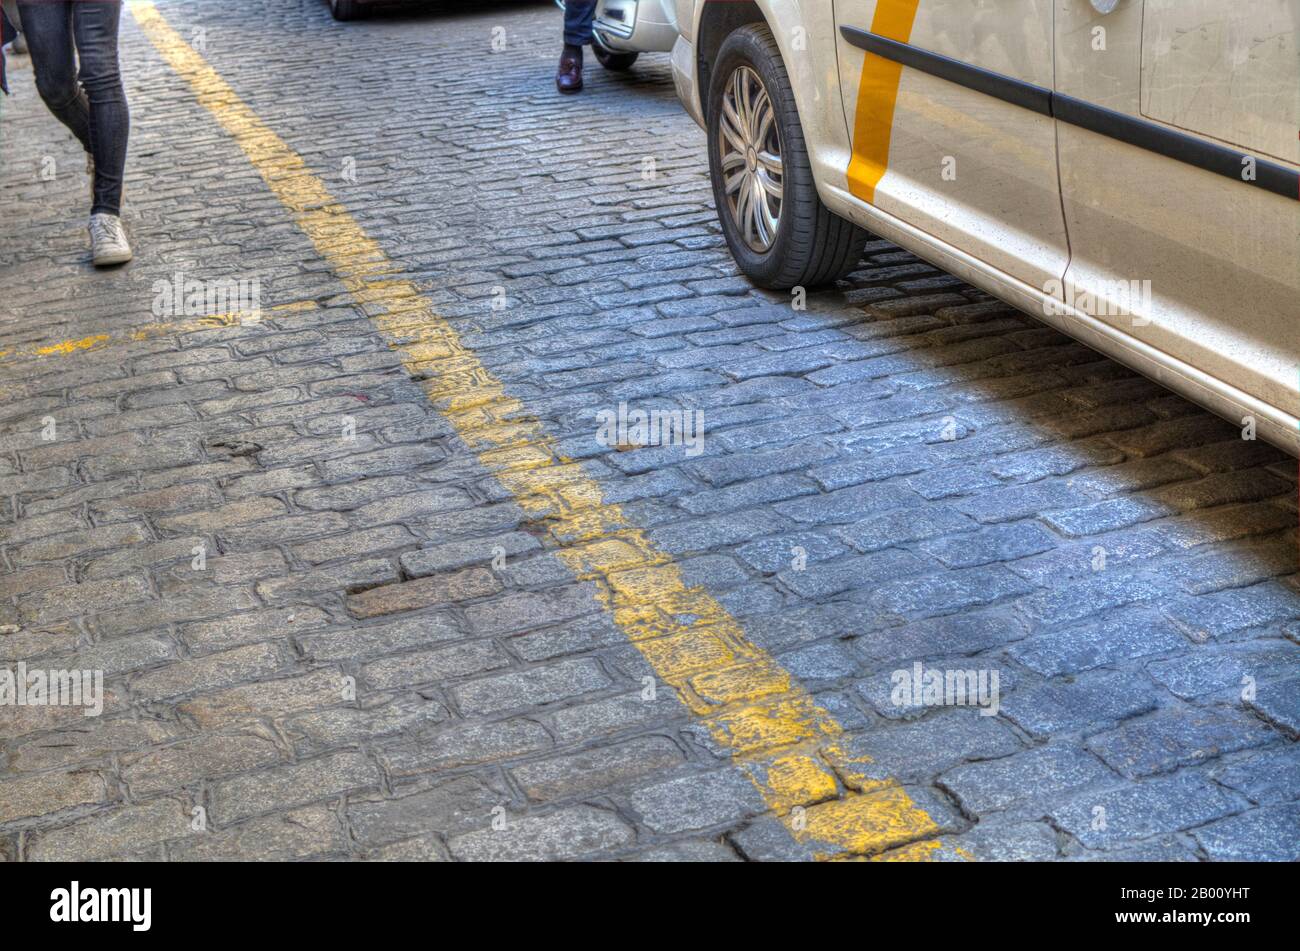 Cobblestone pavement with a yellow line. Pedestrian and vehicles. Seville, Spain. Stock Photo